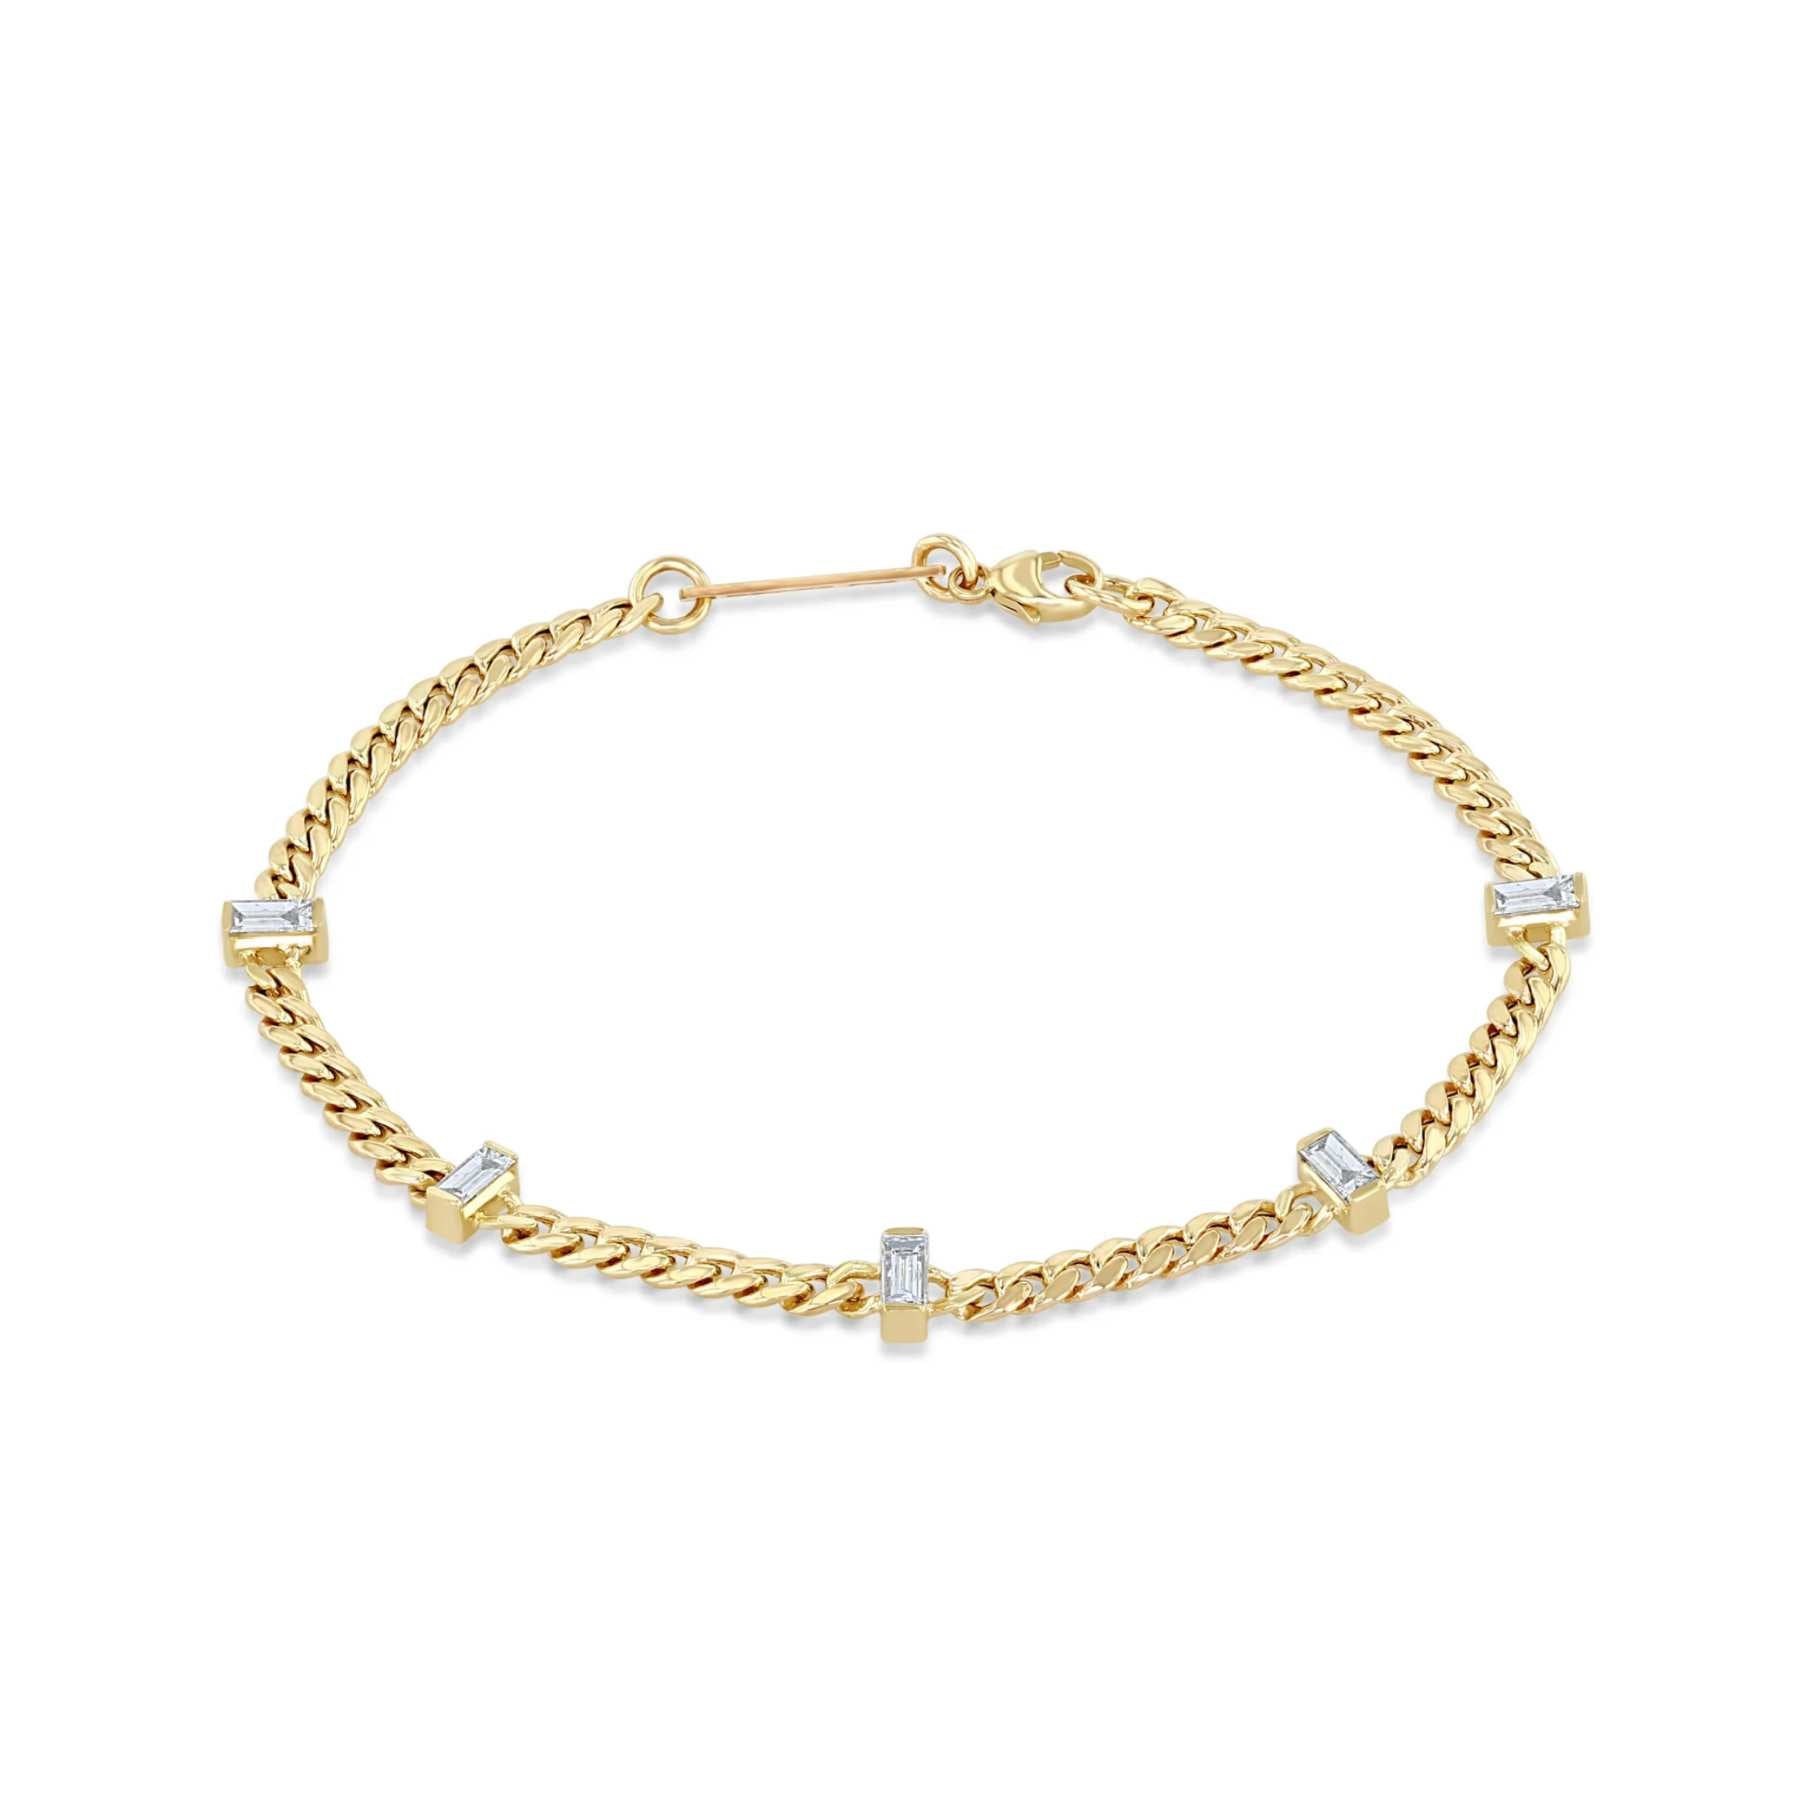 Zoe Chicco 14k -  Small Curb Chain Bracelet with 5 Vertical Baguette Diamond Stations